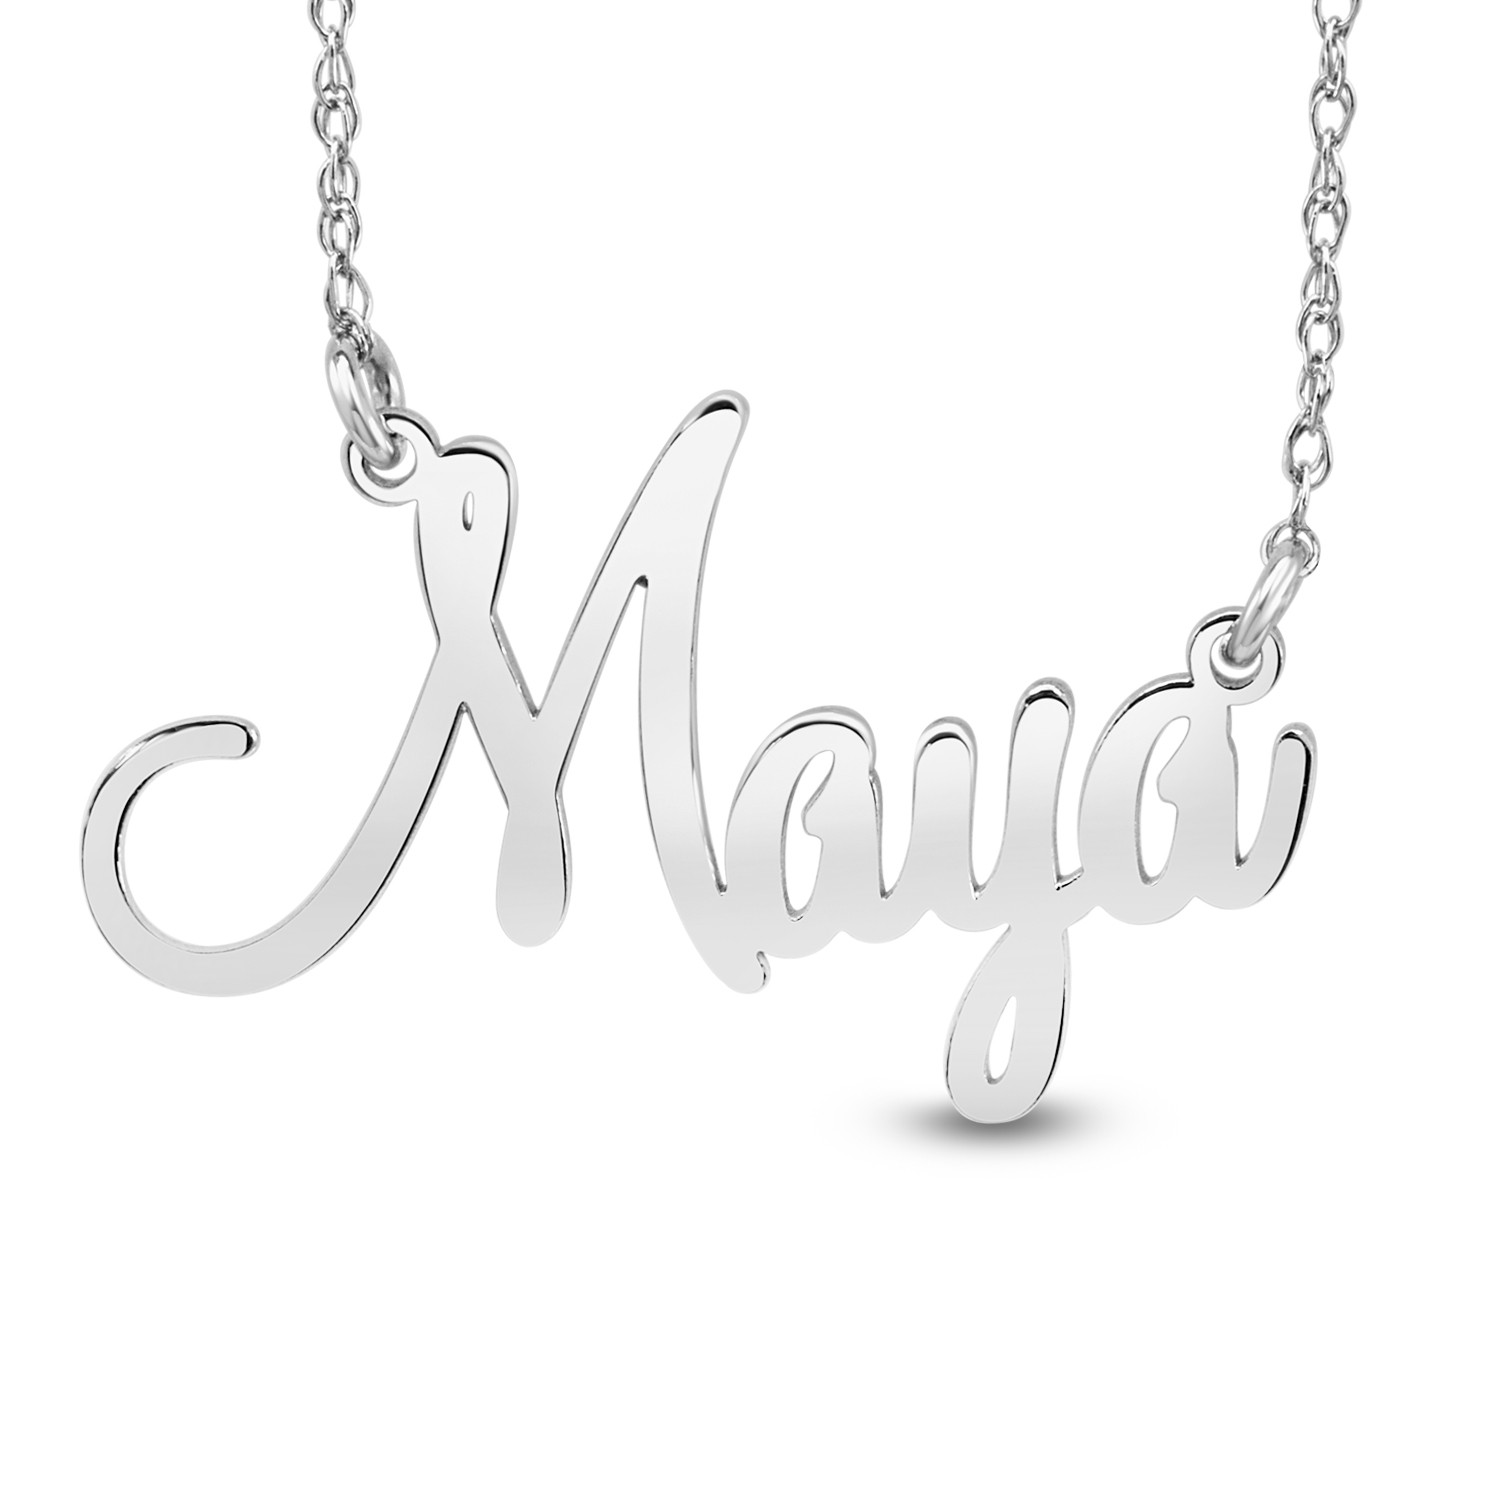 HI Polish Name Pers Necklace - 9 letter max 1 Uppercase letter (Example: Stephanie S=12.65mm x 1.56" e=5.56mm)